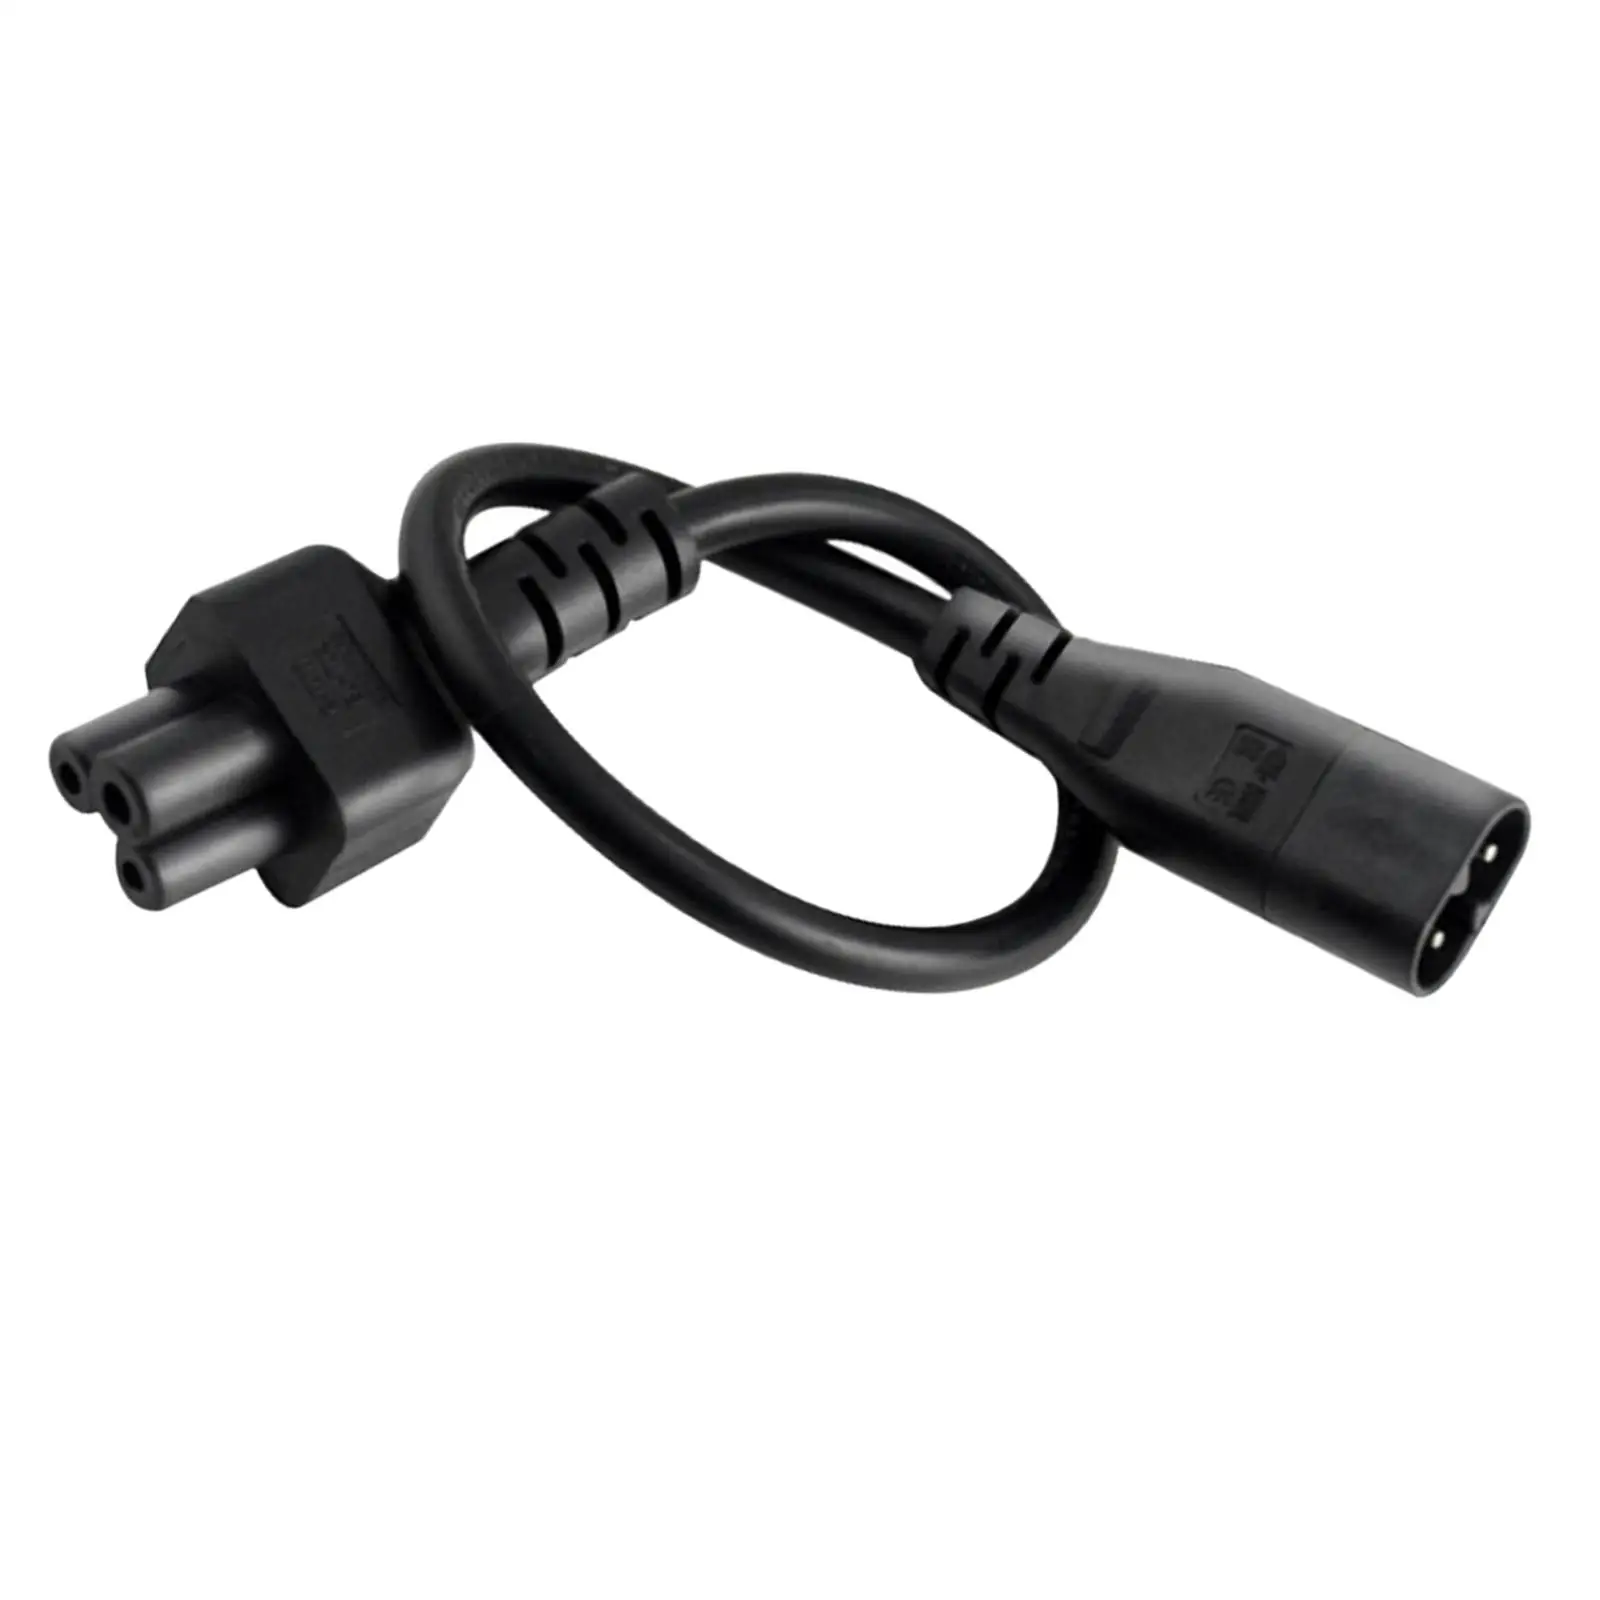 1ft 30cm IEC320-C8 to IEC320-C5 Power Adapter Cable Male to Female Extension Cord for Computer